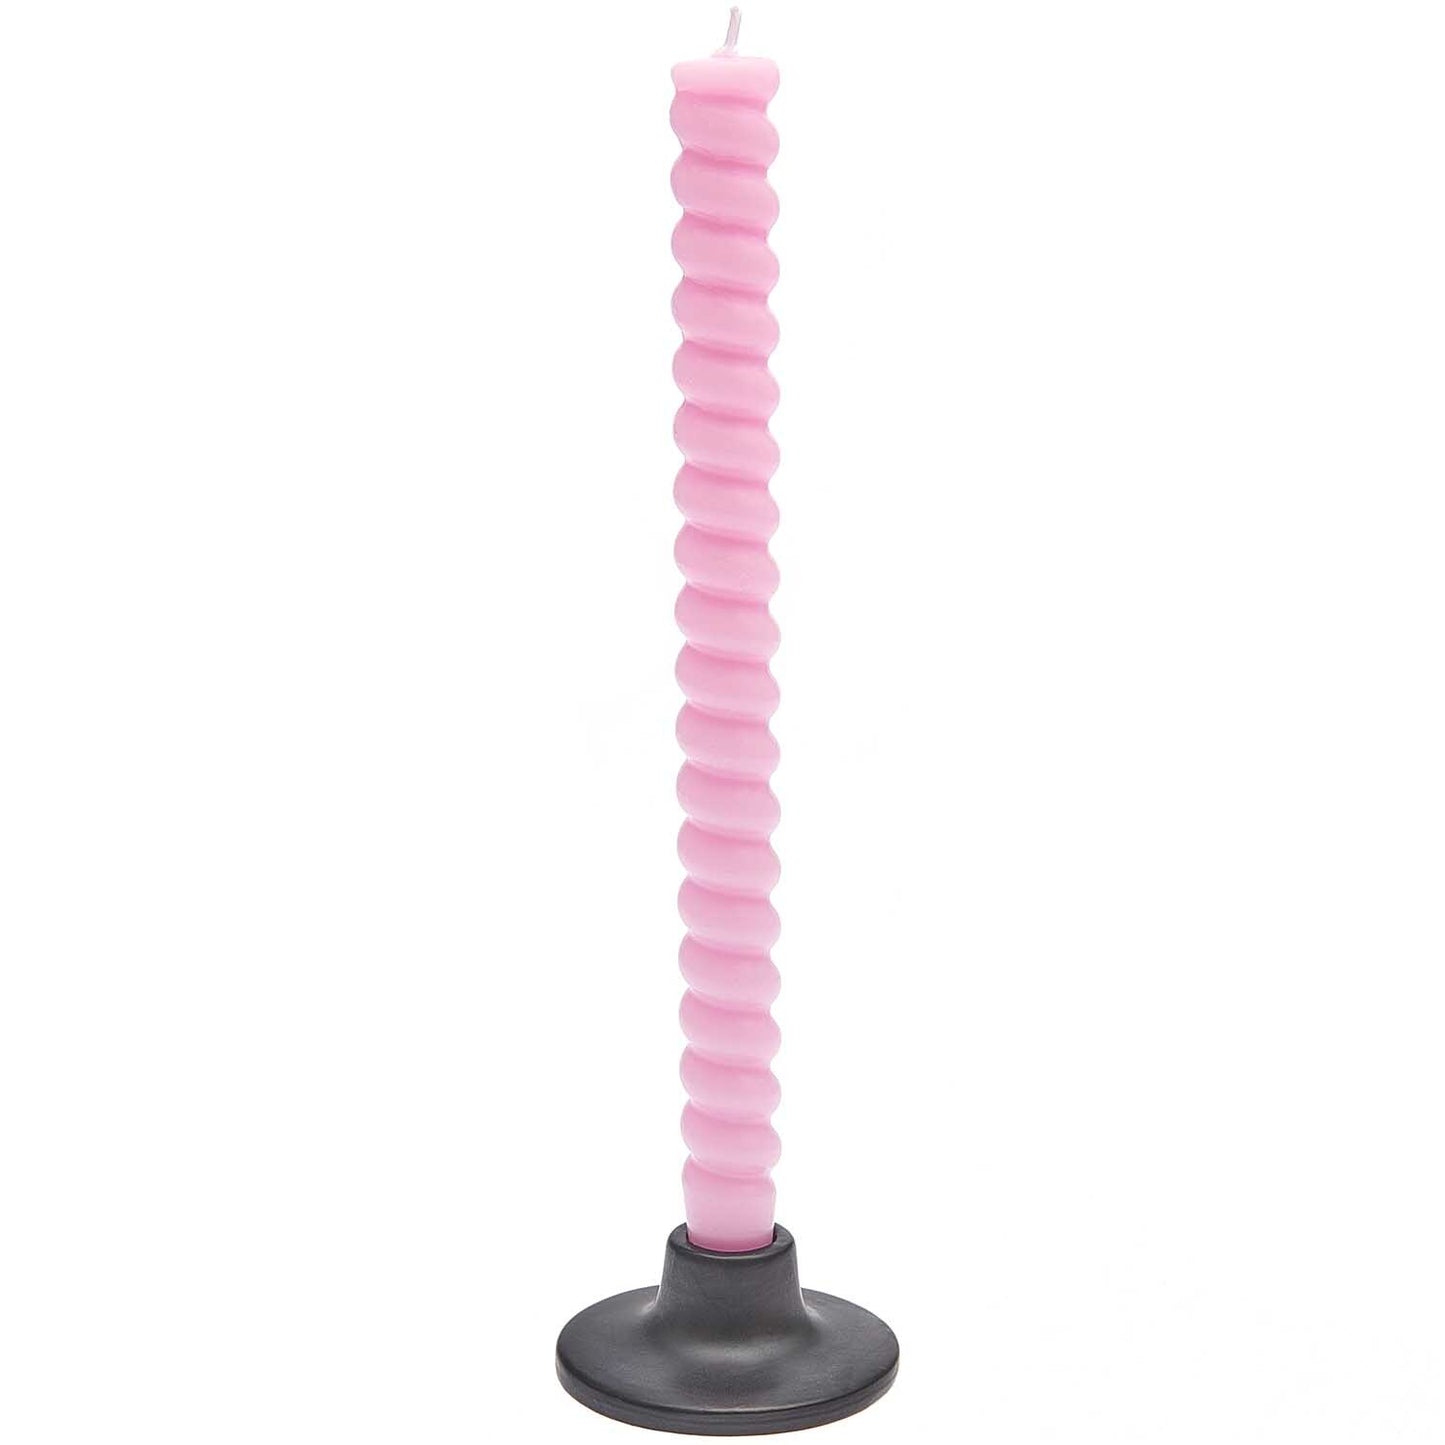 RICO Spiral Candle 28 cm in cherry blossom